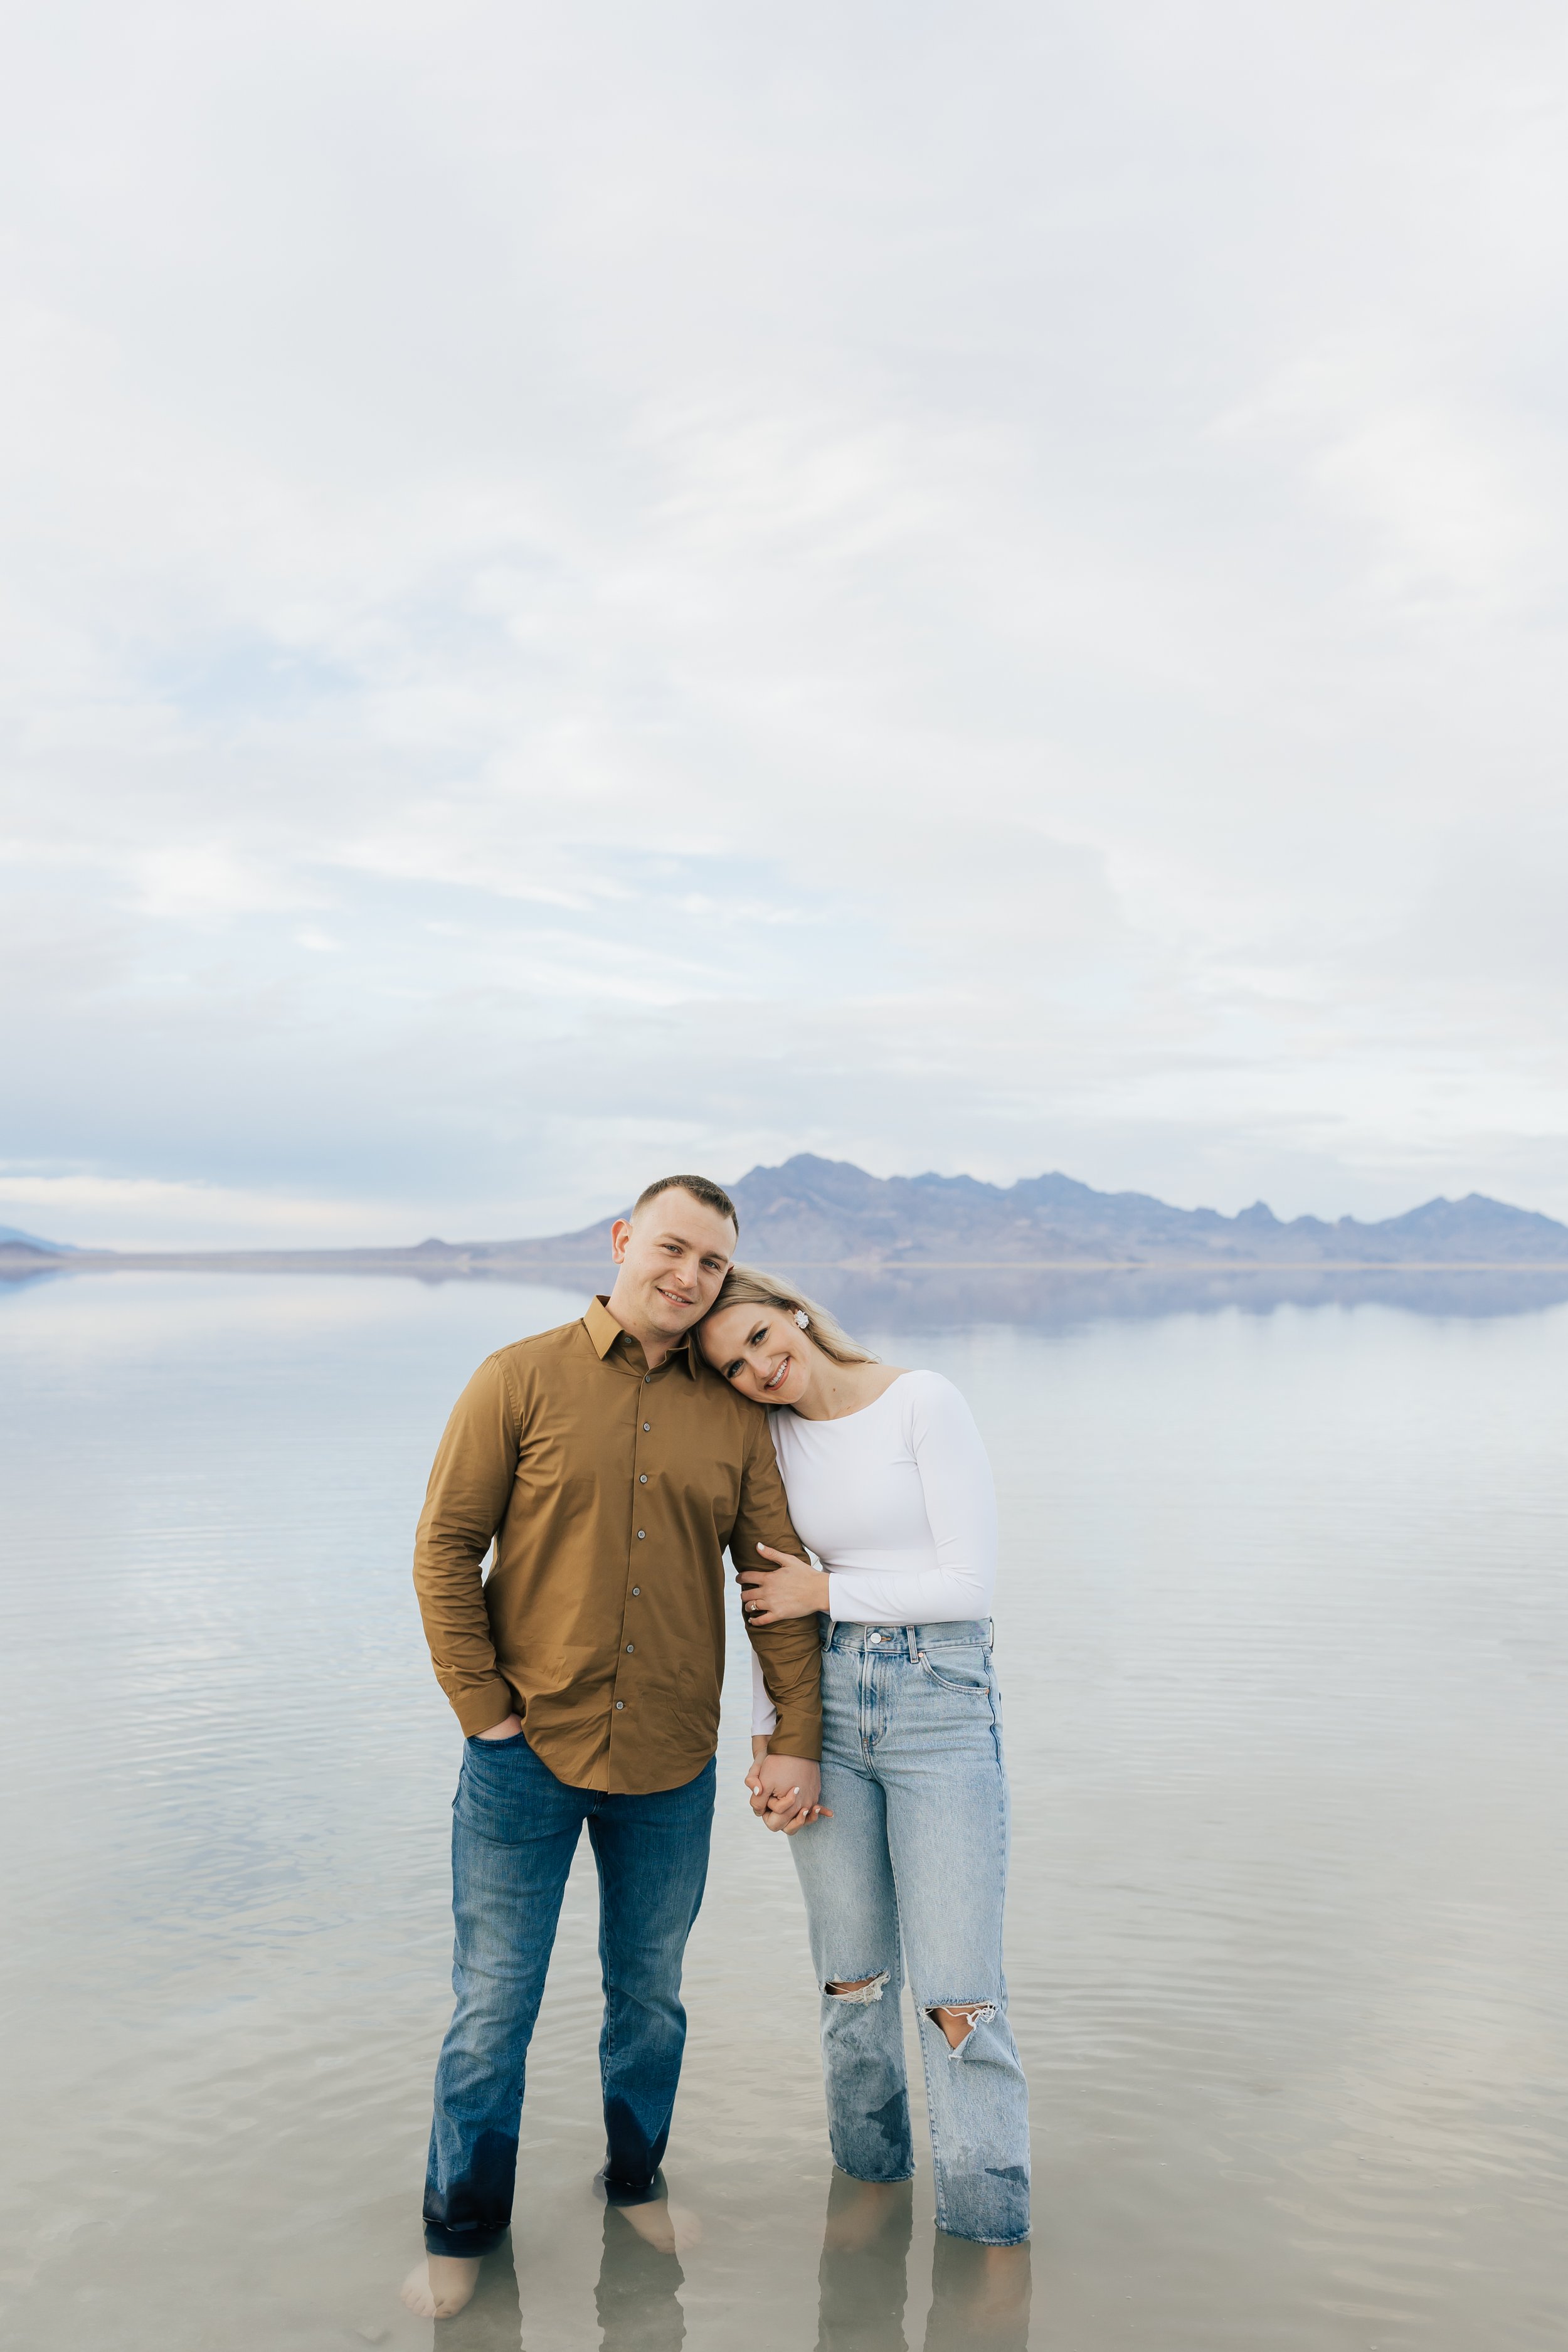  A woman leans her head on her boyfriend's shoulder holding his arm by Emily Jenkins Photography. tan shirt camel colored men shirt jeans and shirt  #EmilyJenkinsPhotography #EmilyJenkinsEngagements #BonnevilleSaltFlats #SaltFlatEngagements #UtahEnga